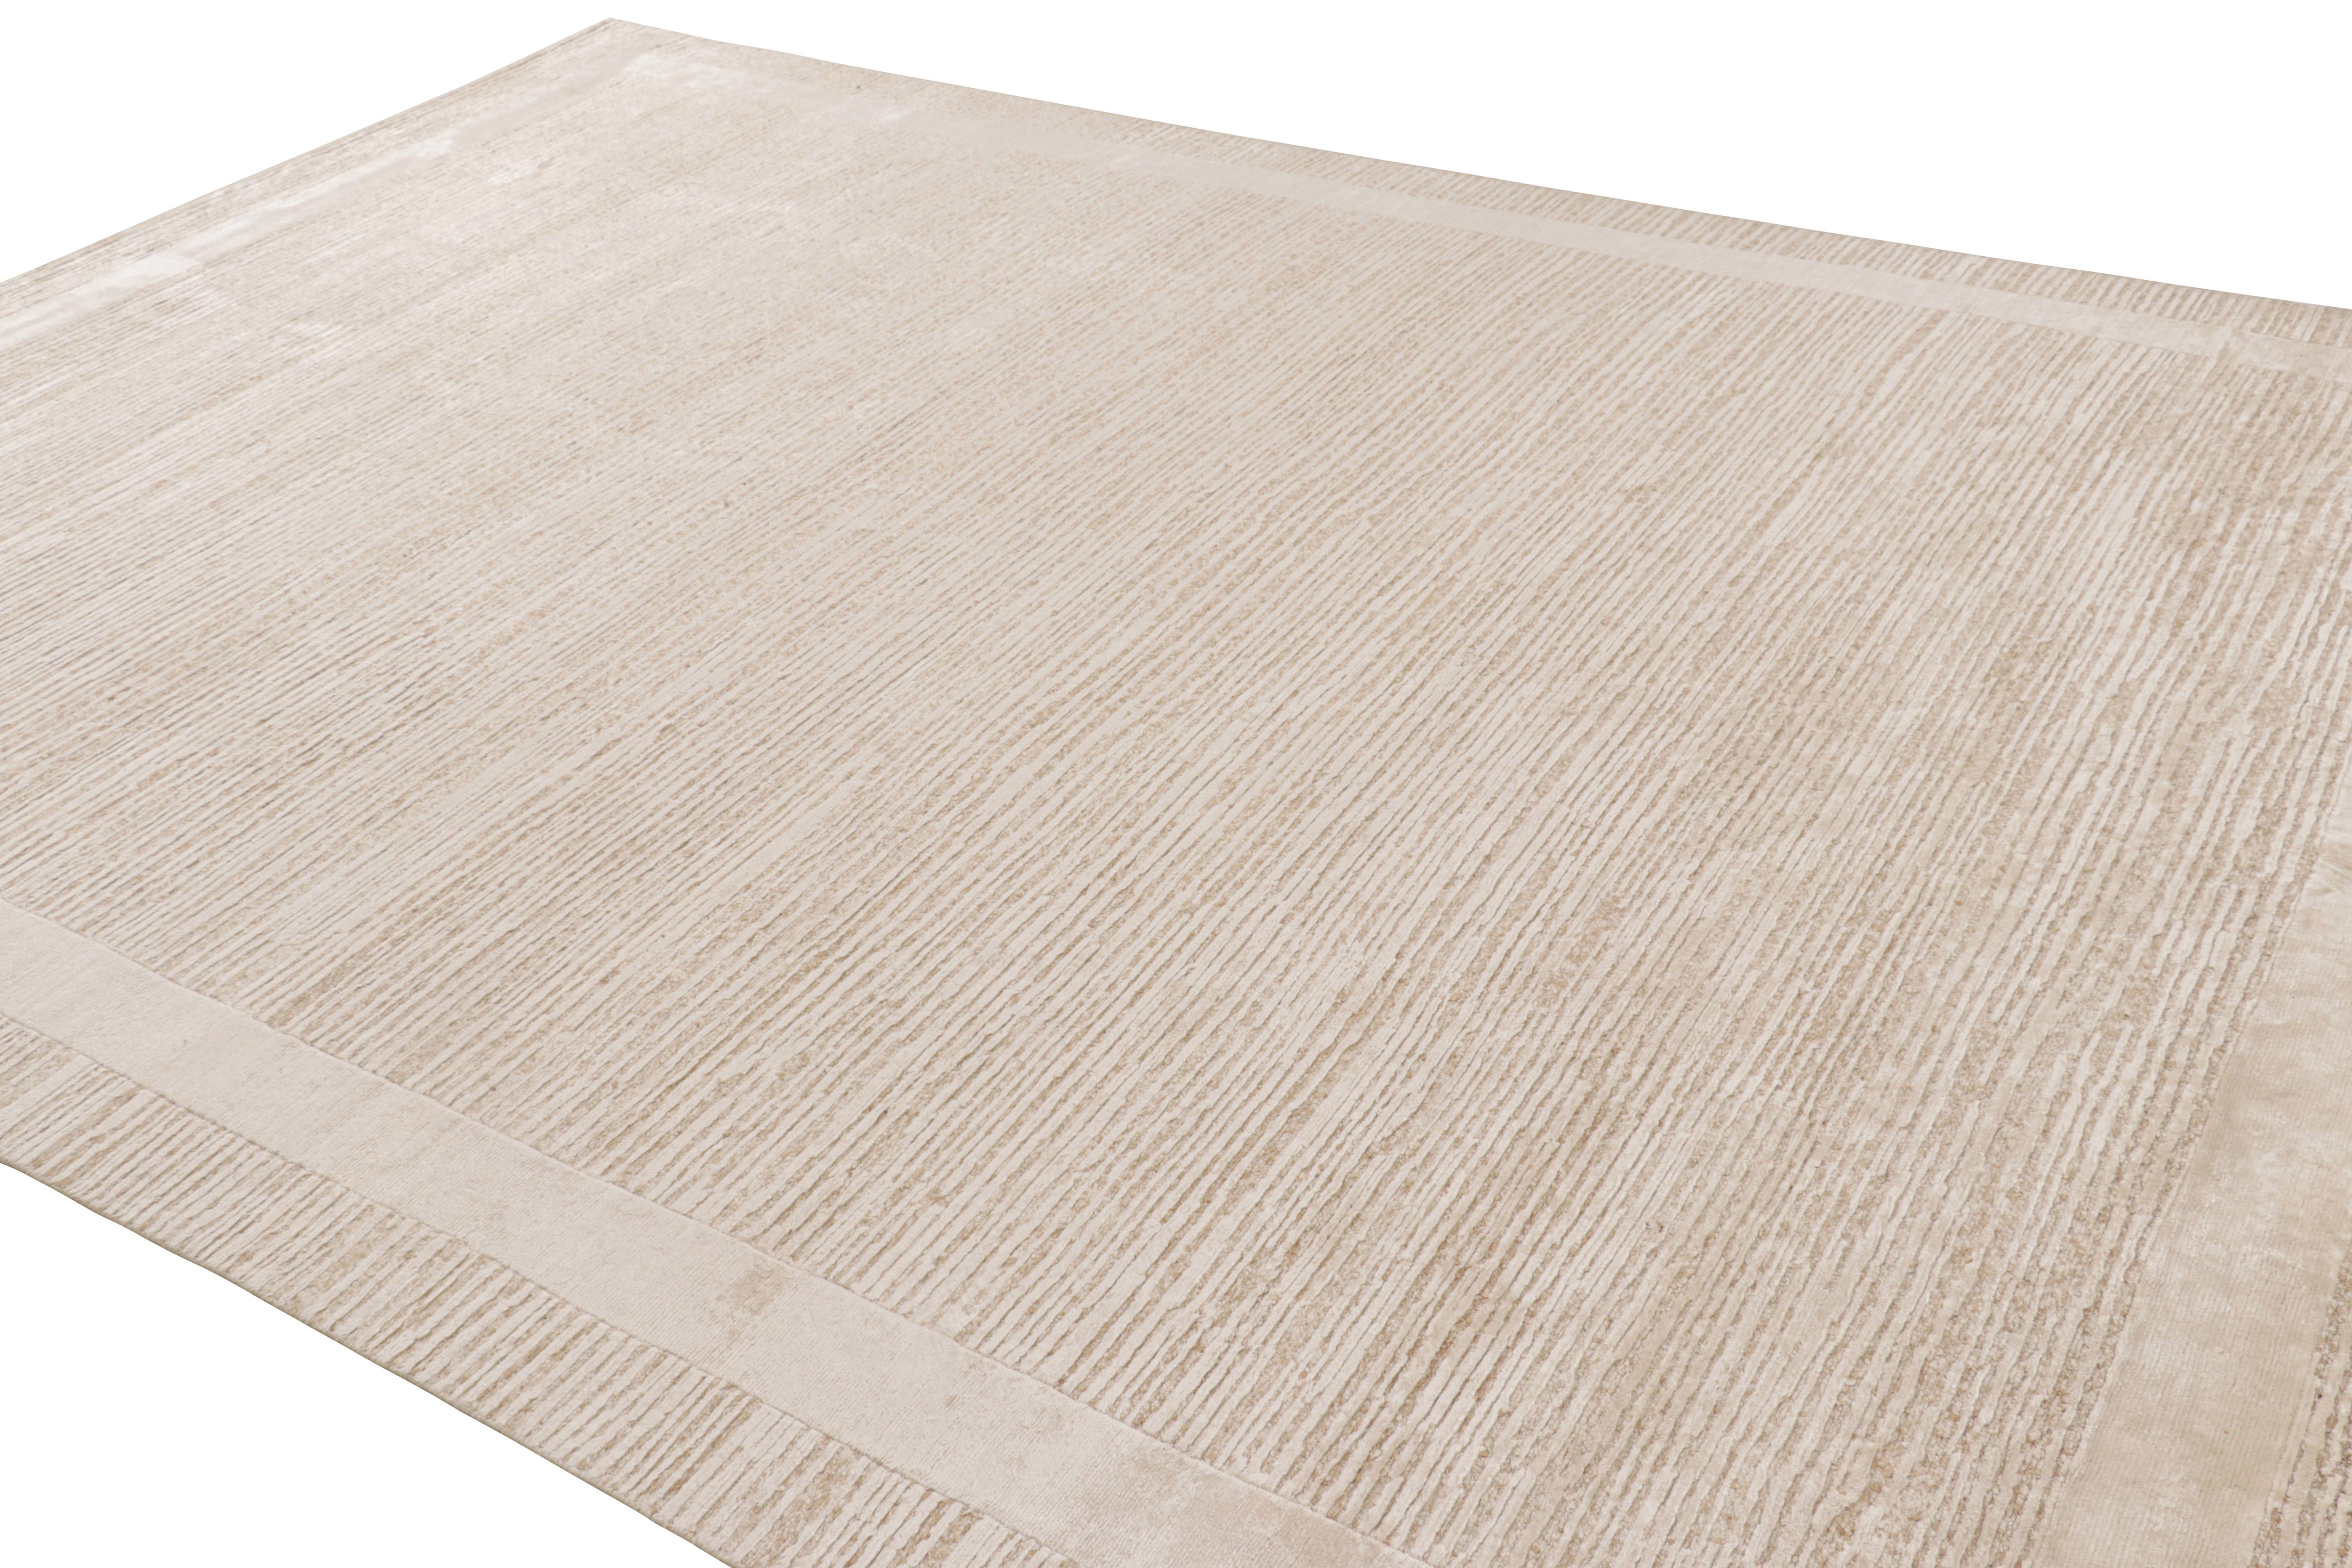 Indian Rug & Kilim’s Contemporary Textural Rug in Beige, Cream and White Tones For Sale